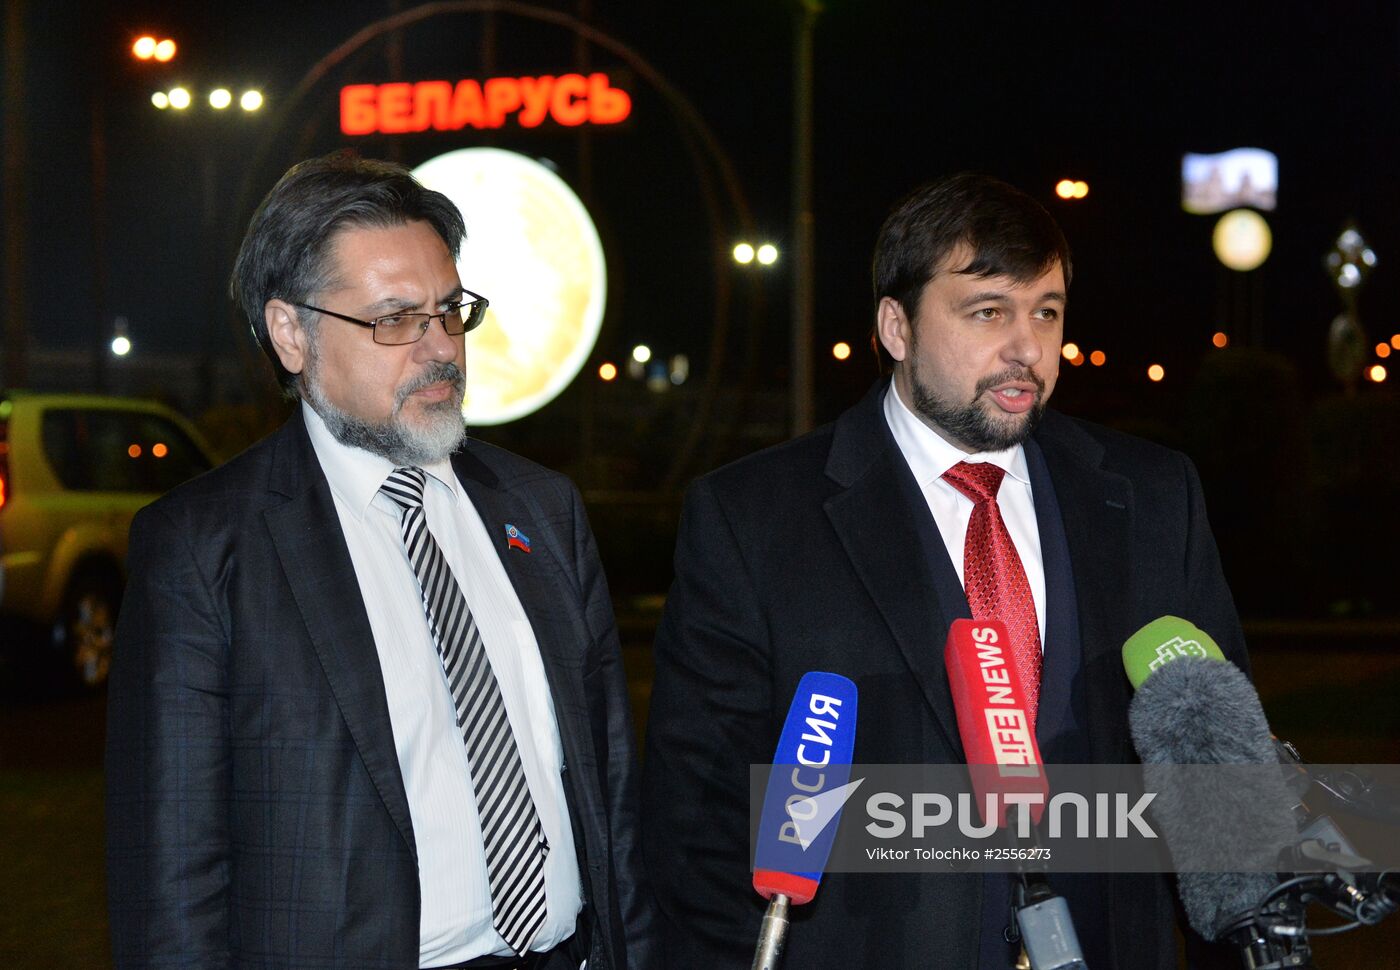 DPR and LPR representatives hold news conference at Minsk airport